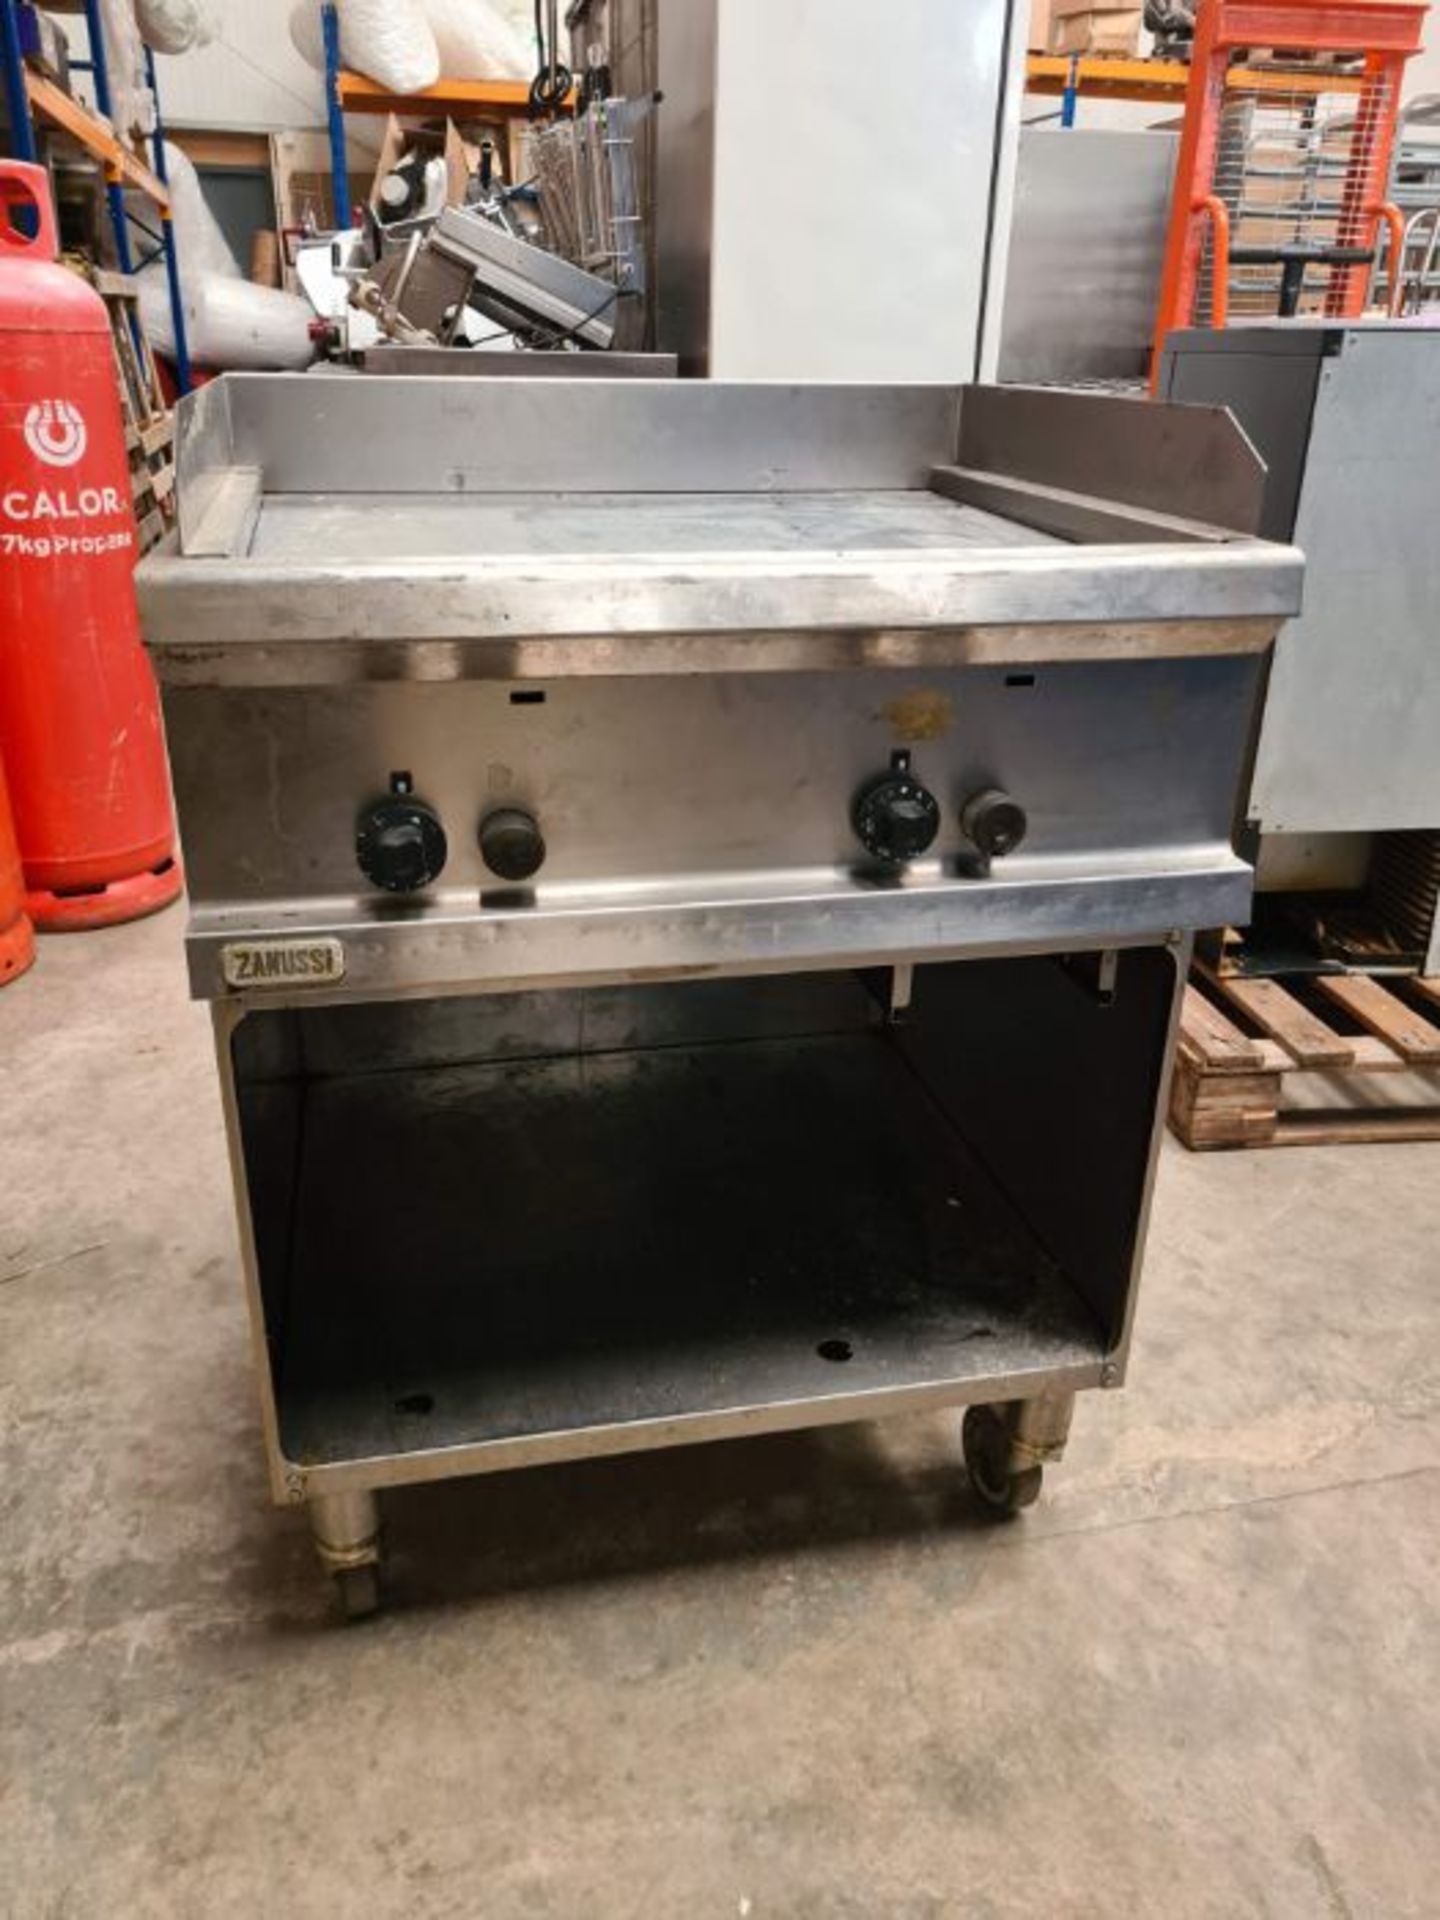 Zanussi stainless steel flat top griddle on stand, gas, 700x700mm - Image 2 of 2